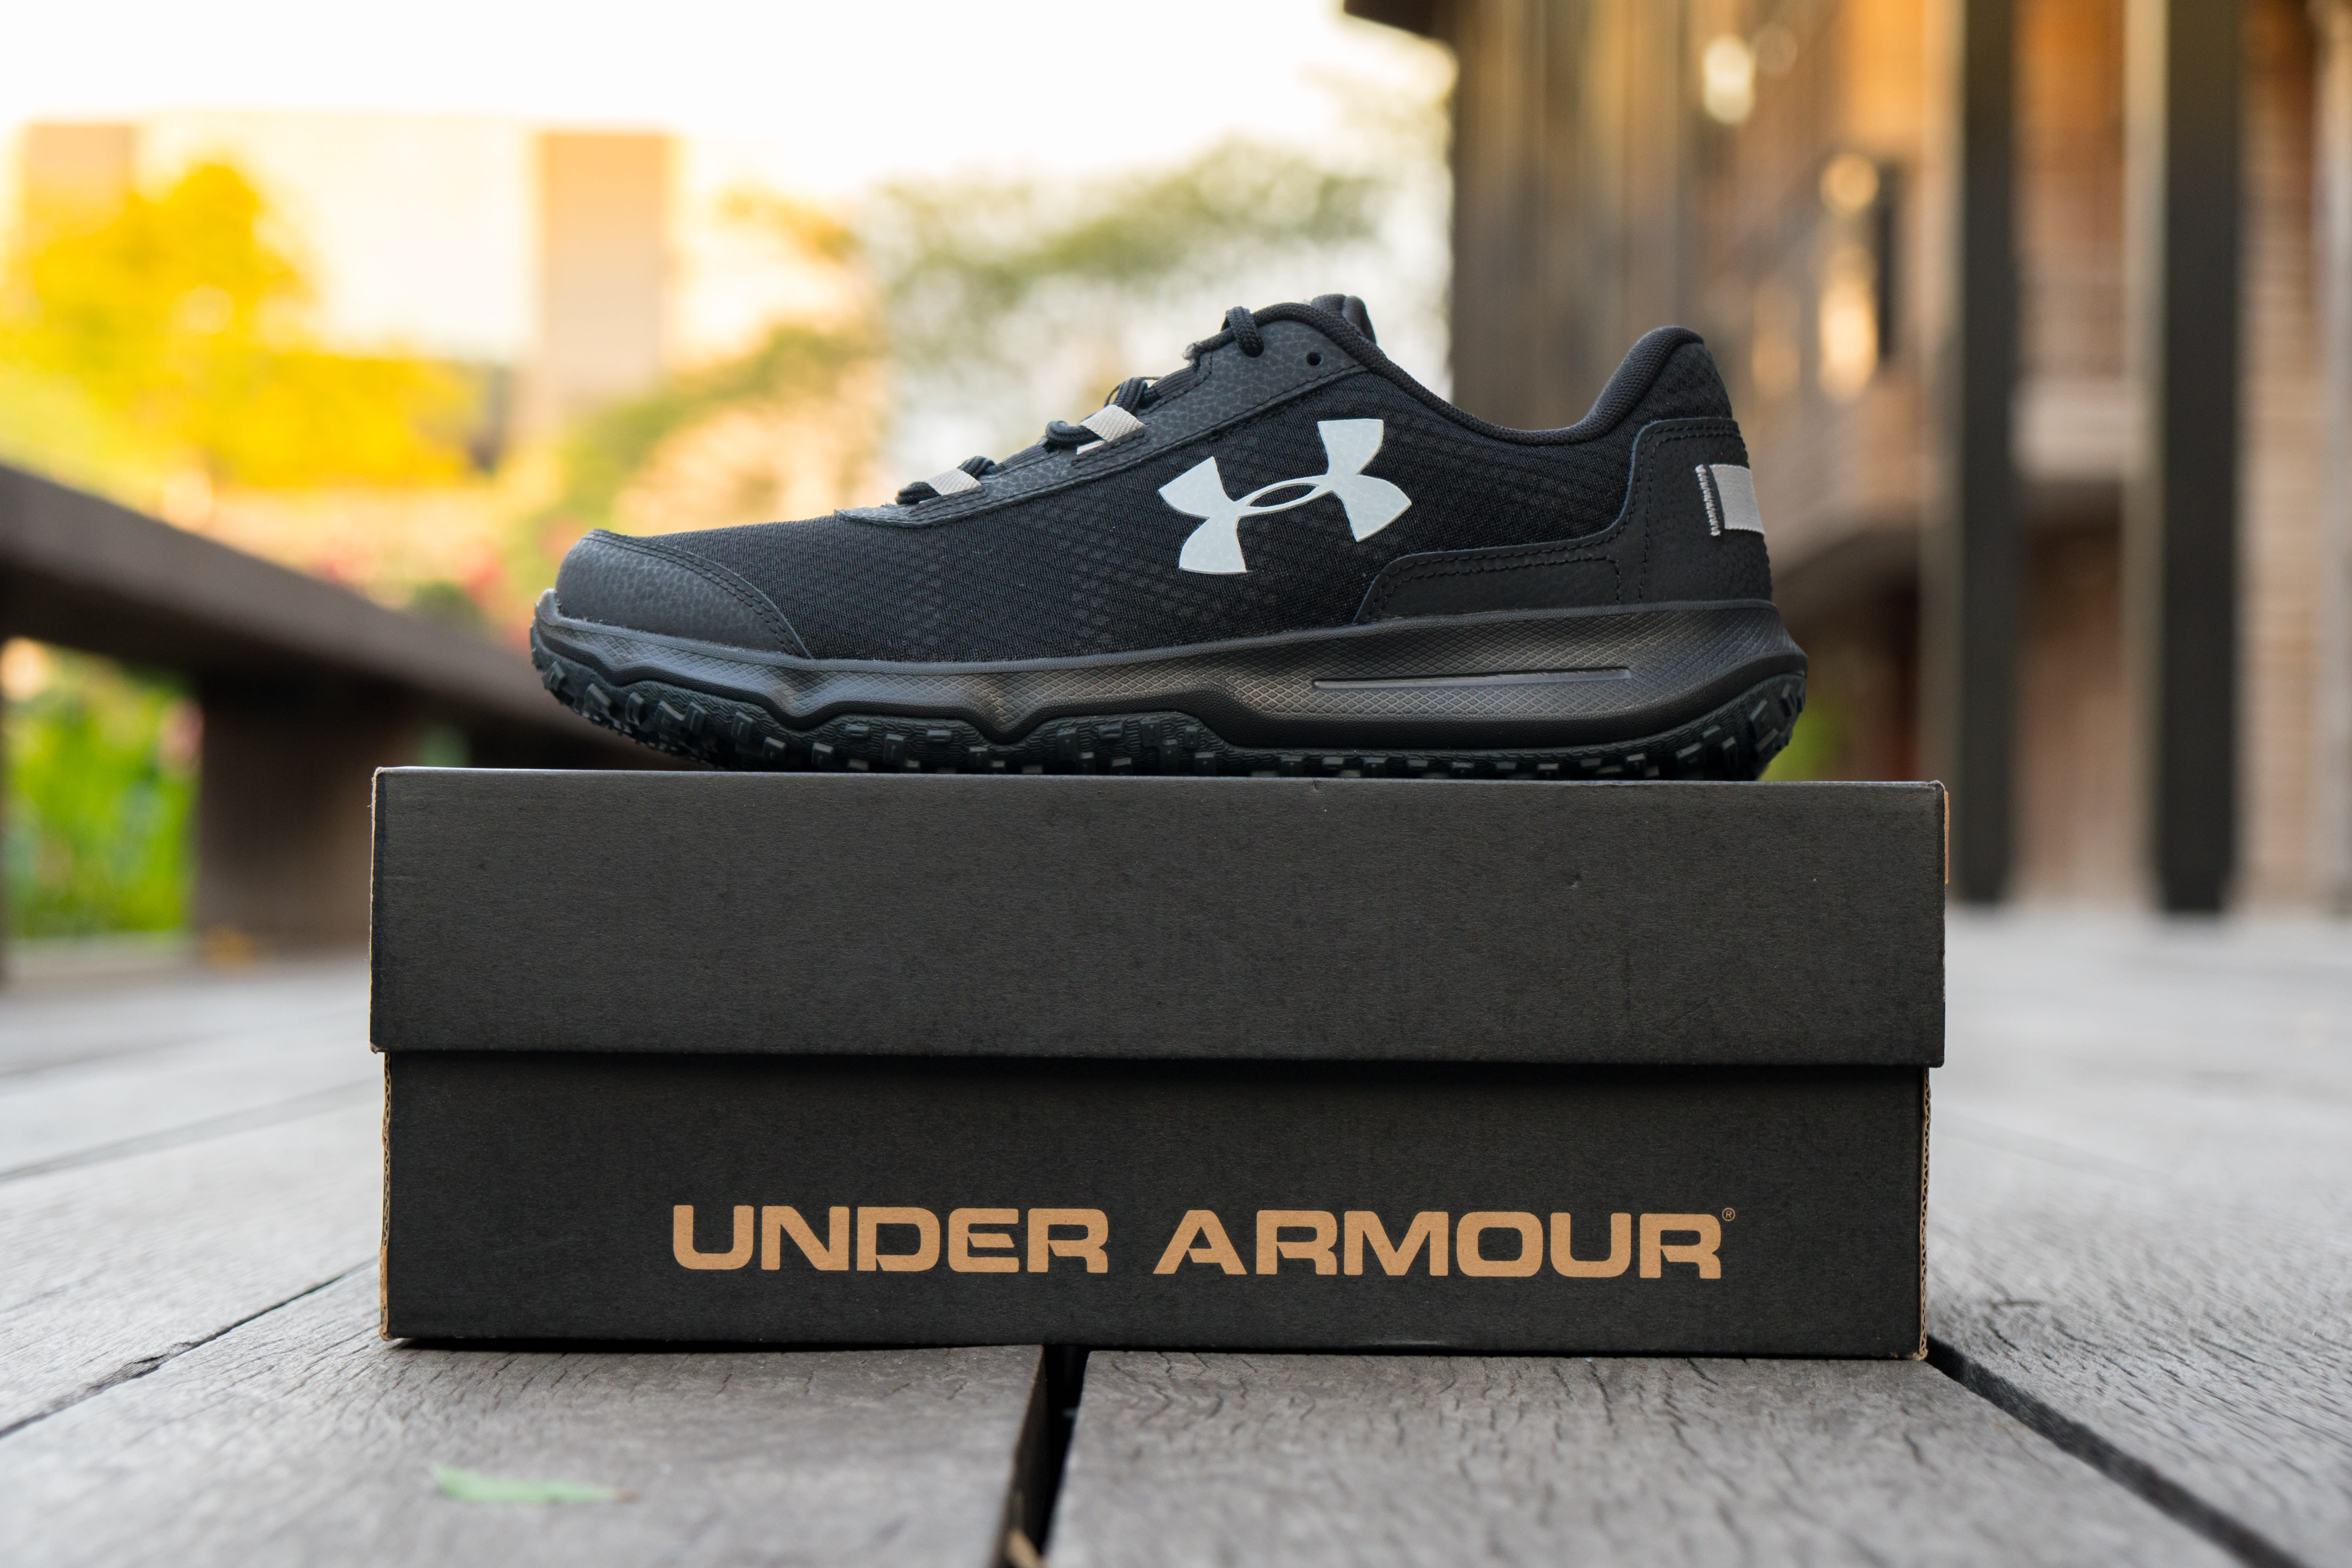 Shares of Under Armour Fall on Uncertain Future